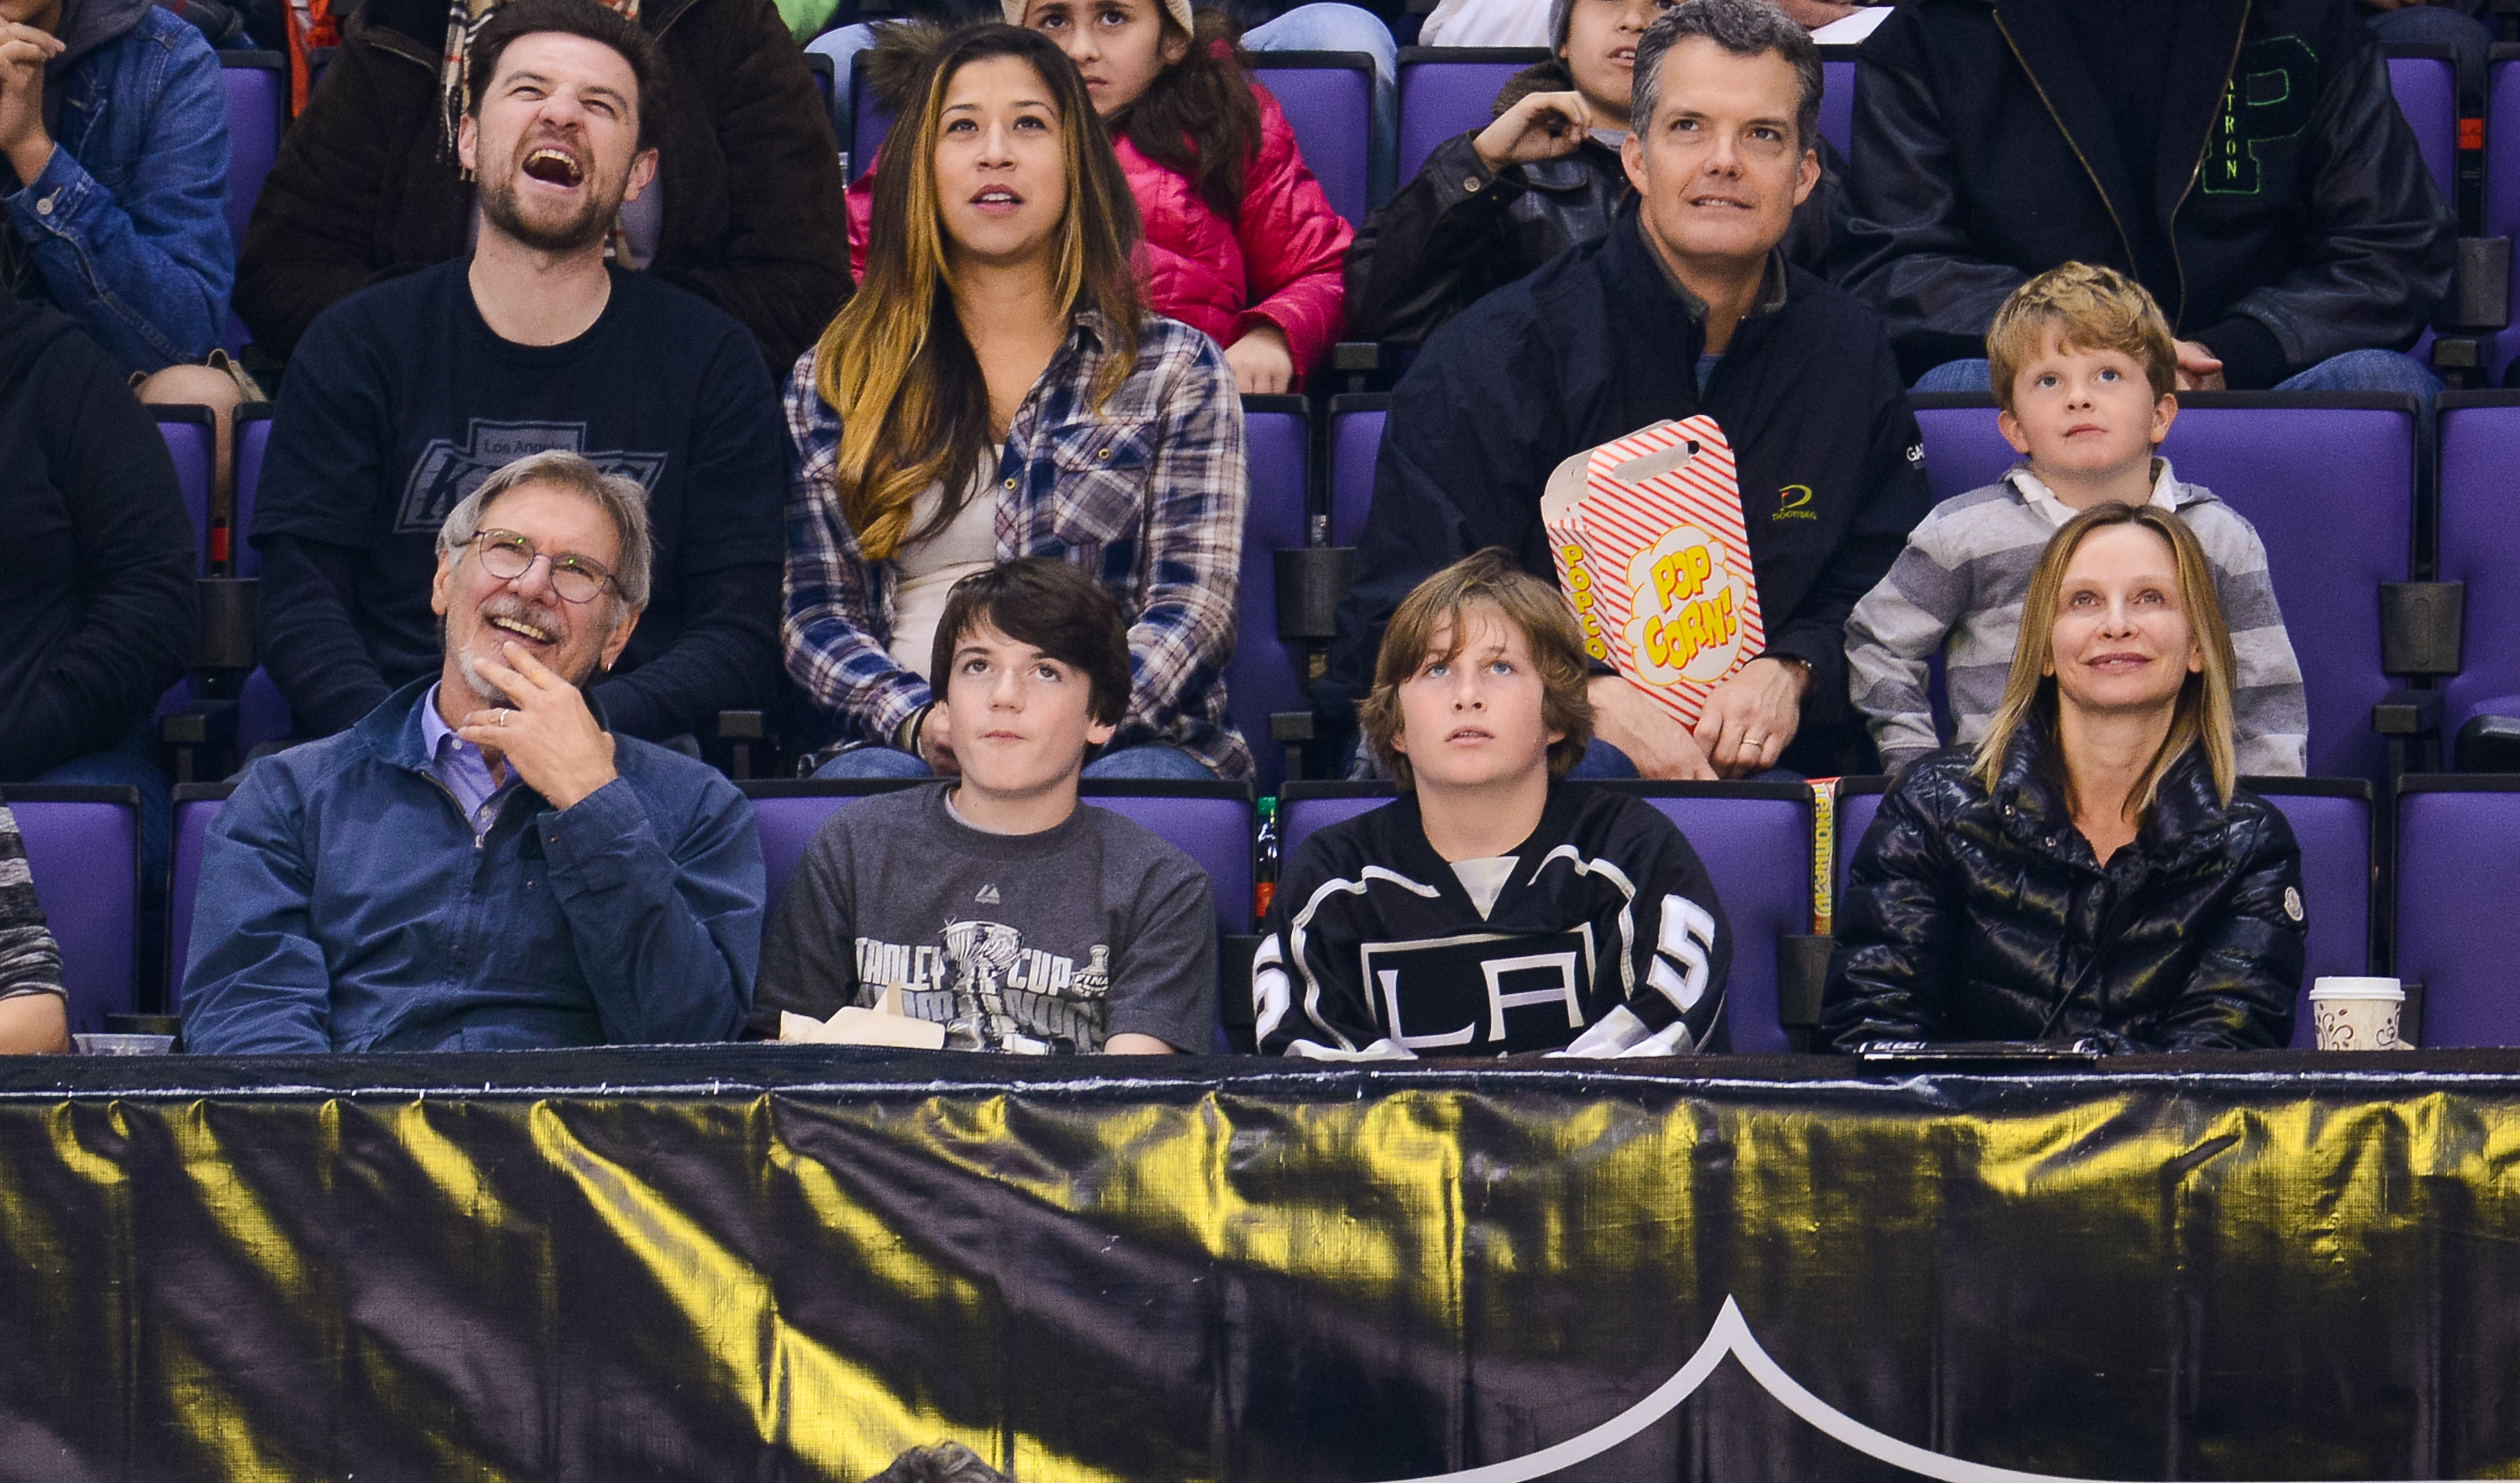 Harrison Ford, Calista Flockhart, and son Liam at Staples Center in Los Angeles, California on March 1, 2014  | Source: Getty Images